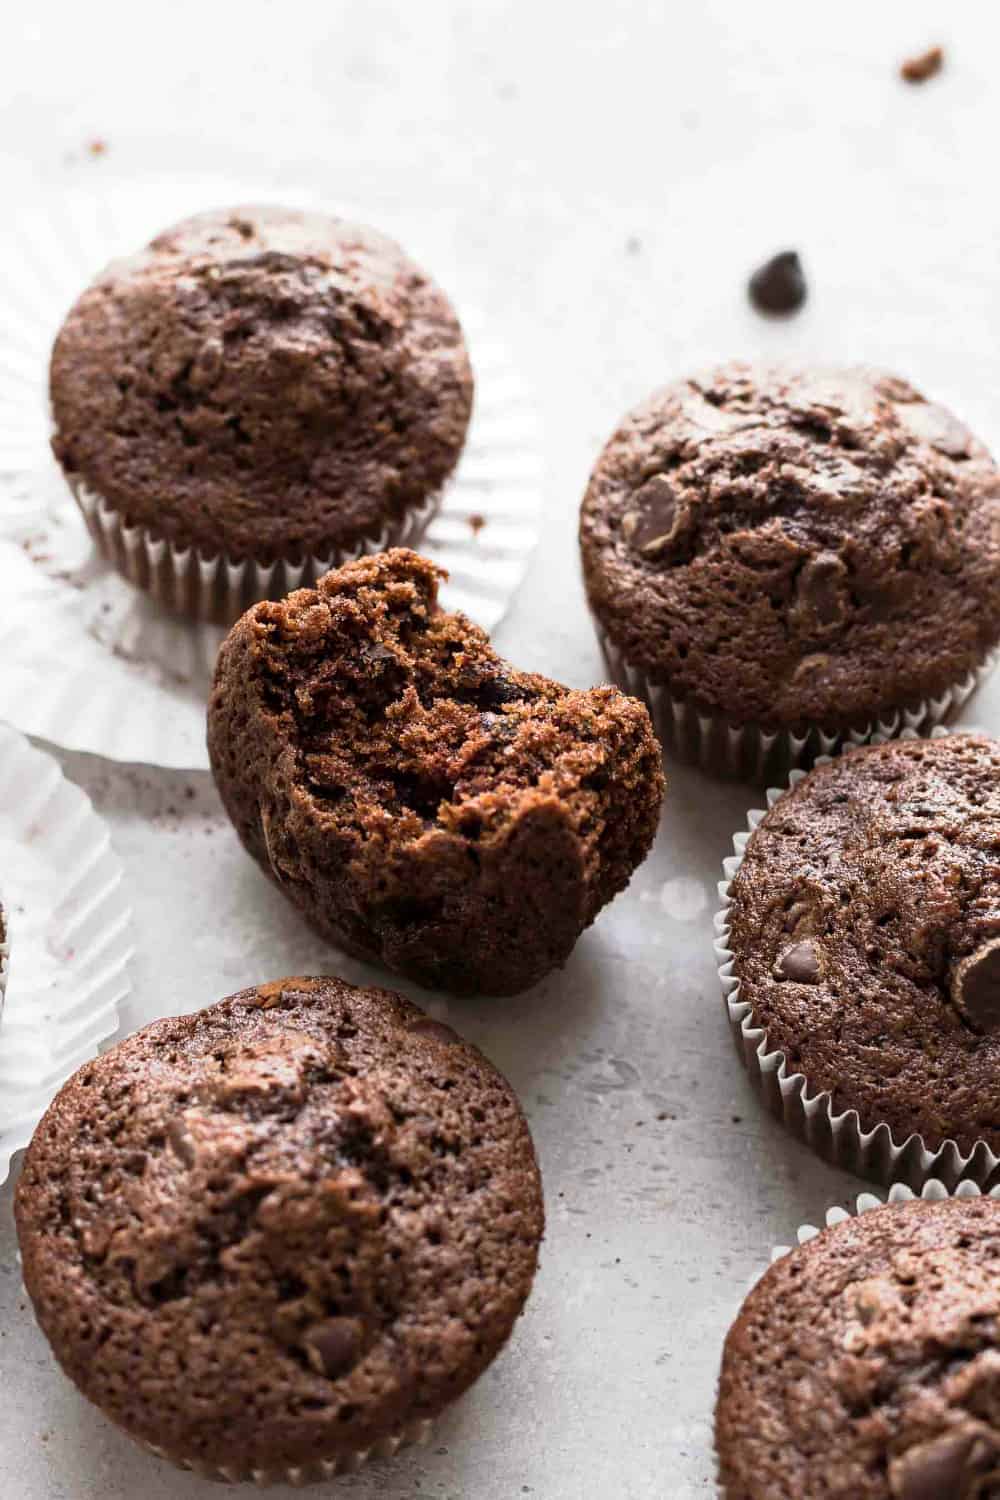 Chocolate zucchini muffin with a bite taken out of it